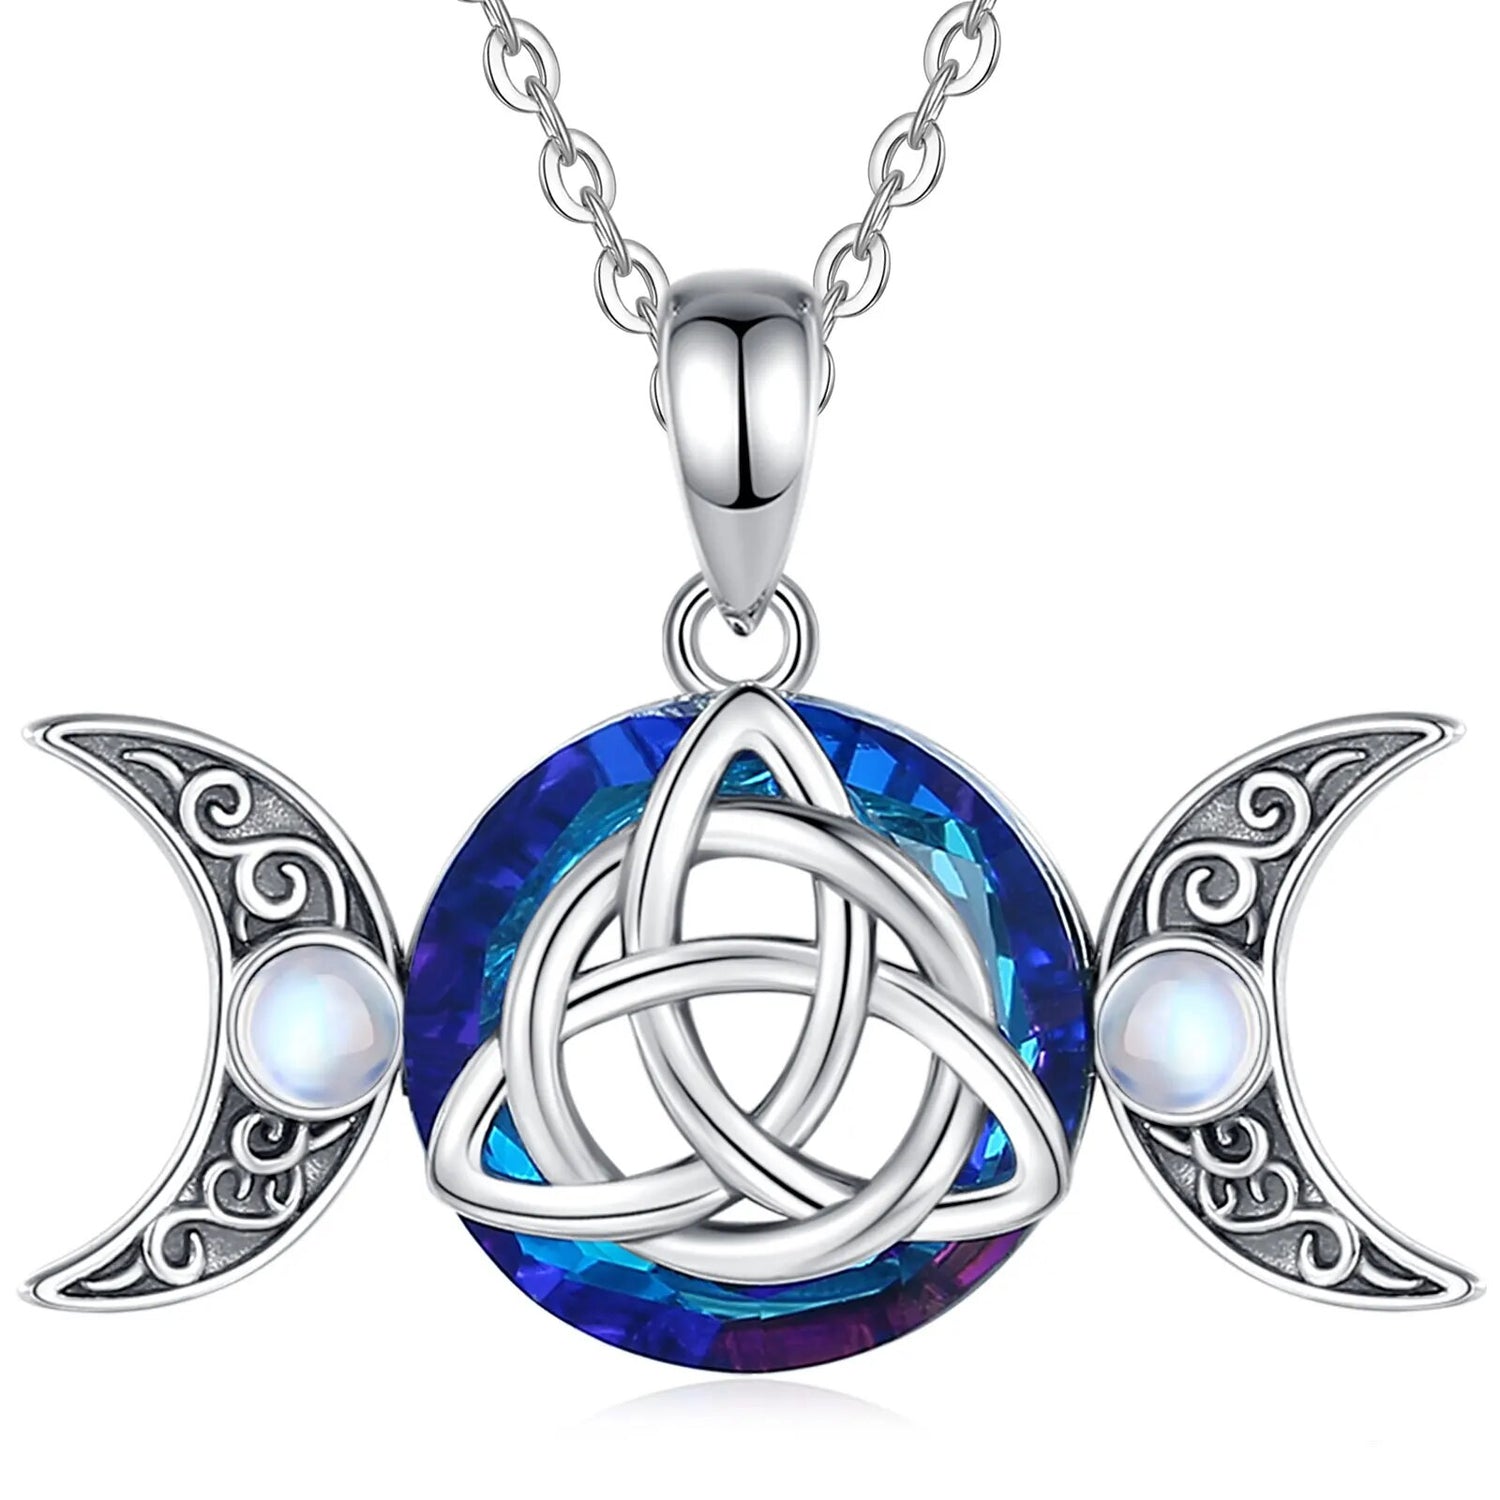 Wiccan Jewelry & Accessories Witch Jewelry – Page 3